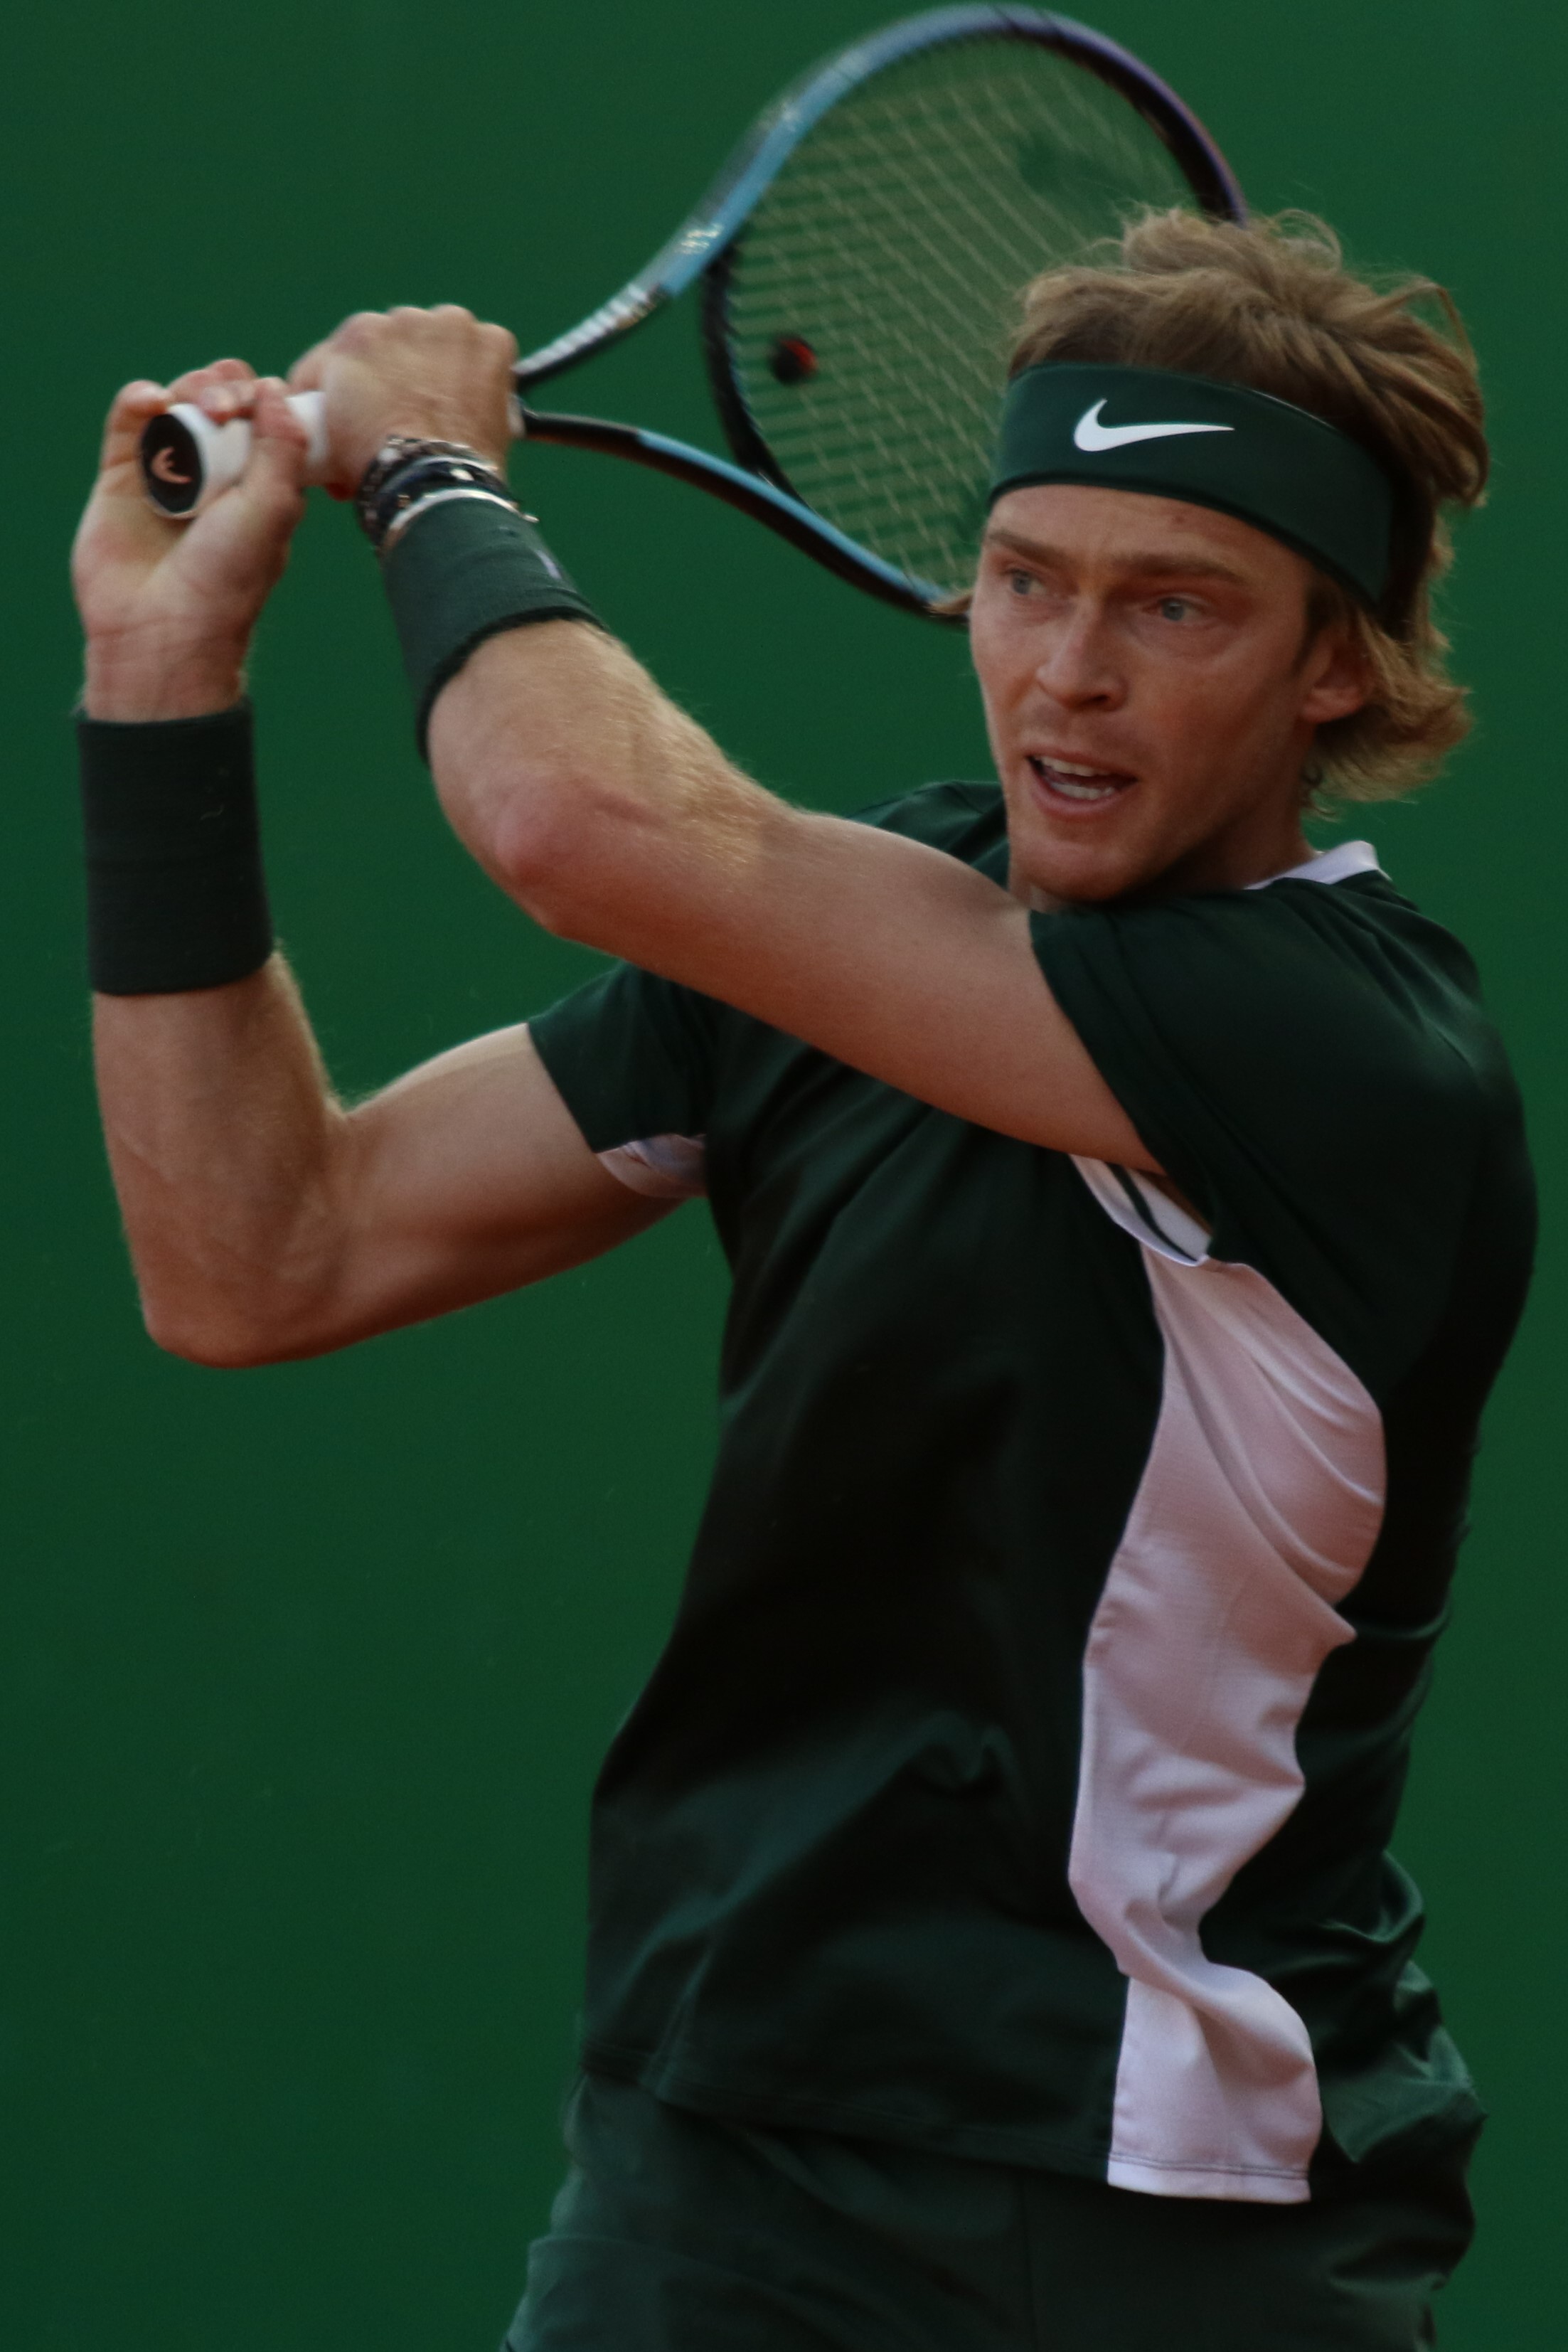 Tennis-Rublev beats wunderkind Rune with lucky net cord on match point 